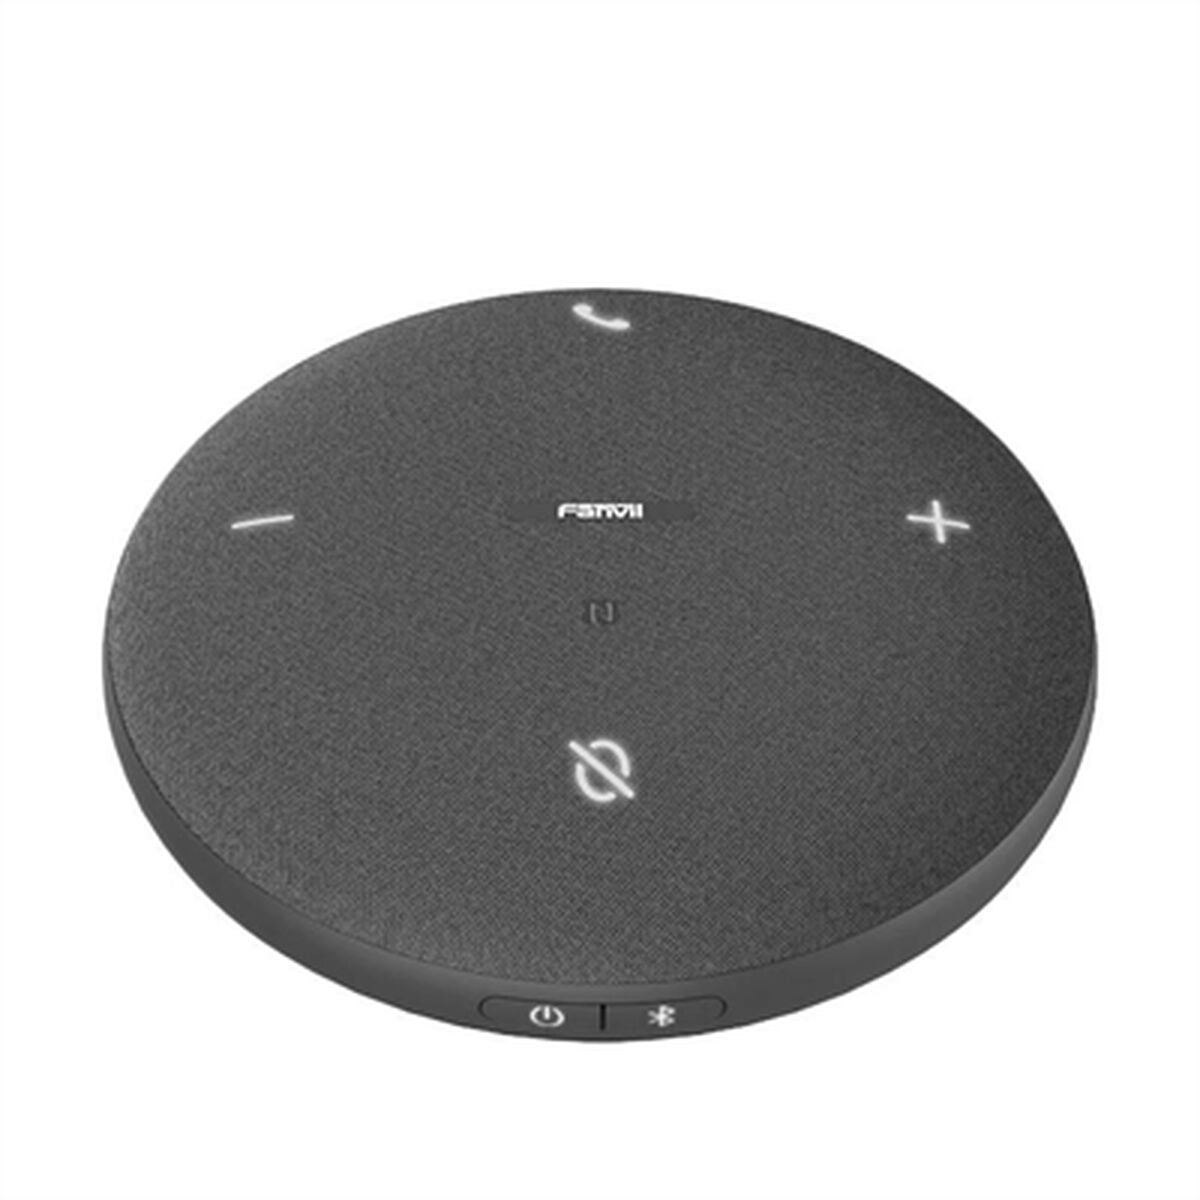 Bluetooth Speakers Fanvil CS30 Black 5 W, Fanvil, Electronics, Mobile communication and accessories, bluetooth-speakers-fanvil-cs30-black-5-w, Brand_Fanvil, category-reference-2609, category-reference-2882, category-reference-2923, category-reference-t-19653, category-reference-t-21311, category-reference-t-25527, category-reference-t-4036, category-reference-t-4037, Condition_NEW, entertainment, music, Price_50 - 100, telephones & tablets, wifi y bluetooth, RiotNook